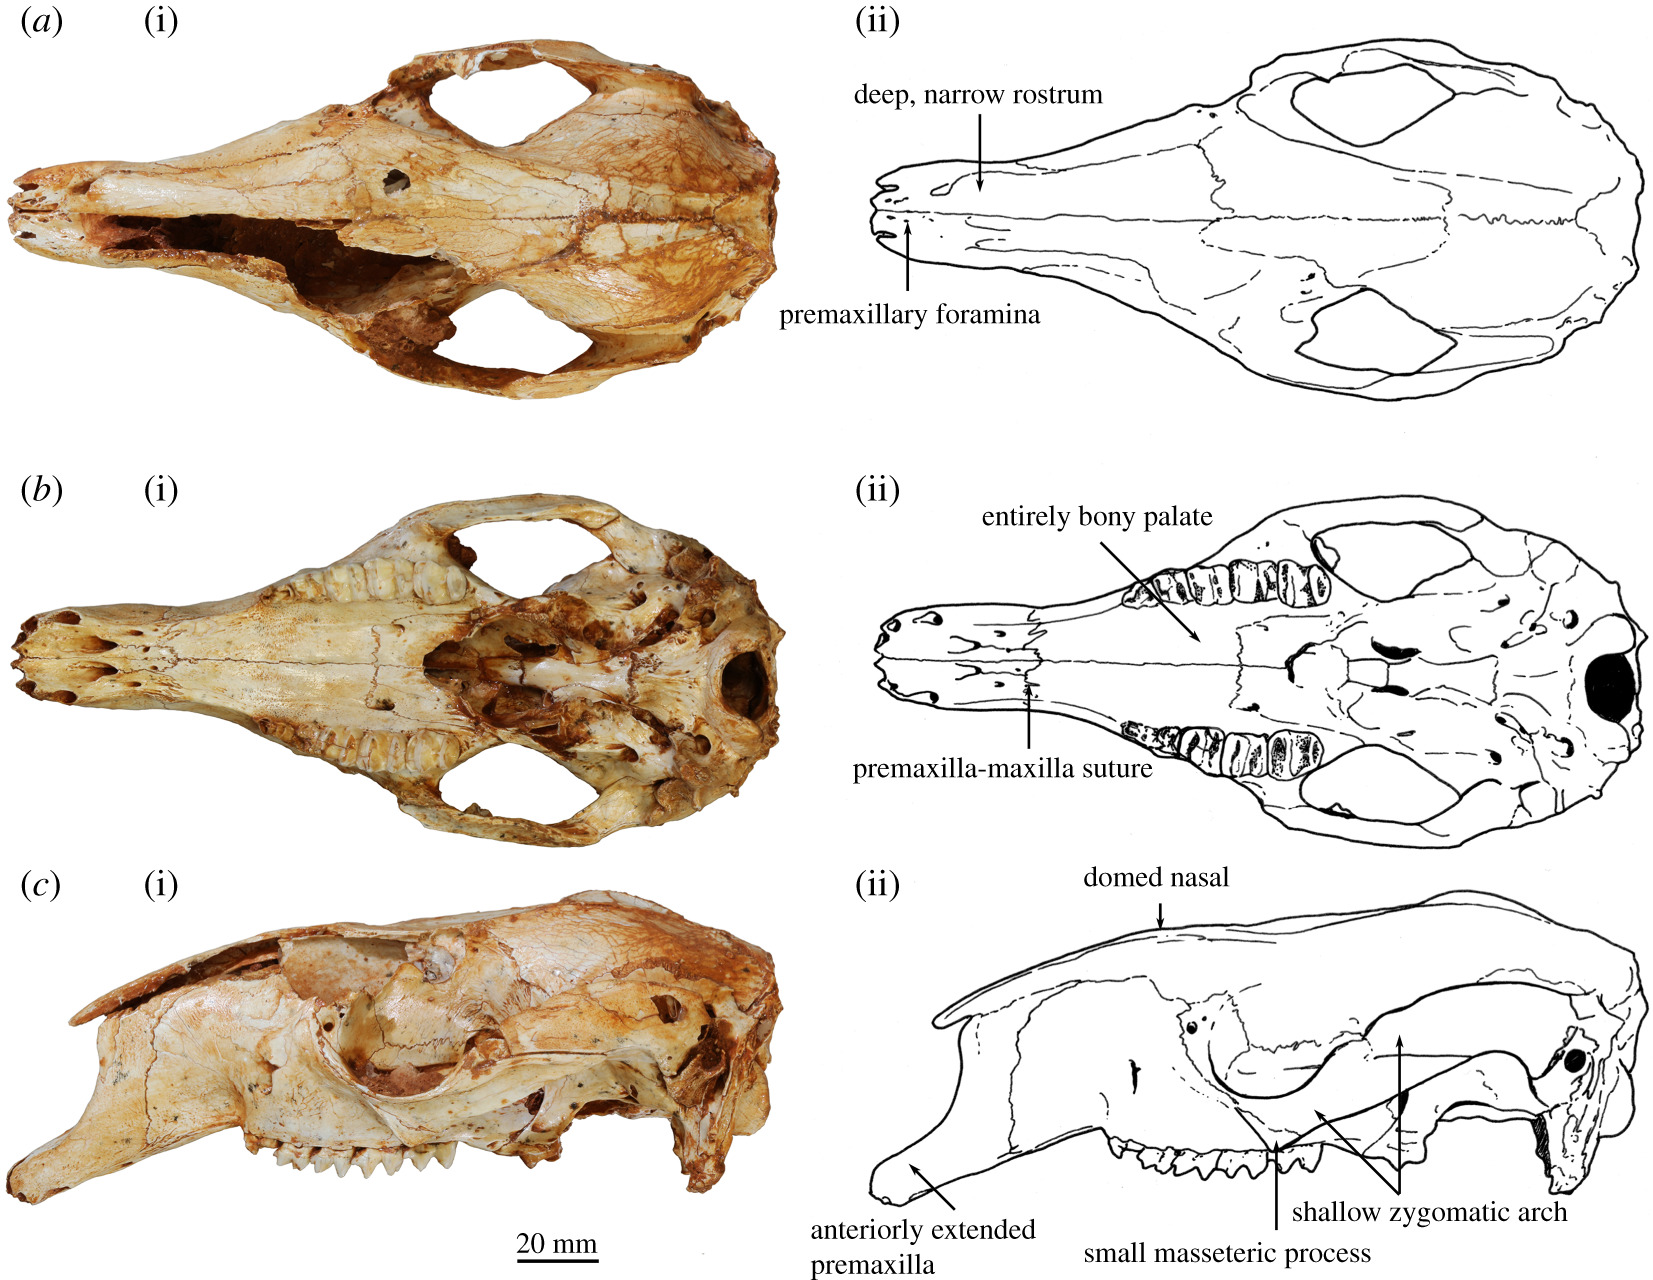 Figure showing photographs of the skull of Congruus kitcheneri with accompanying line figures describing the characters of the skull.